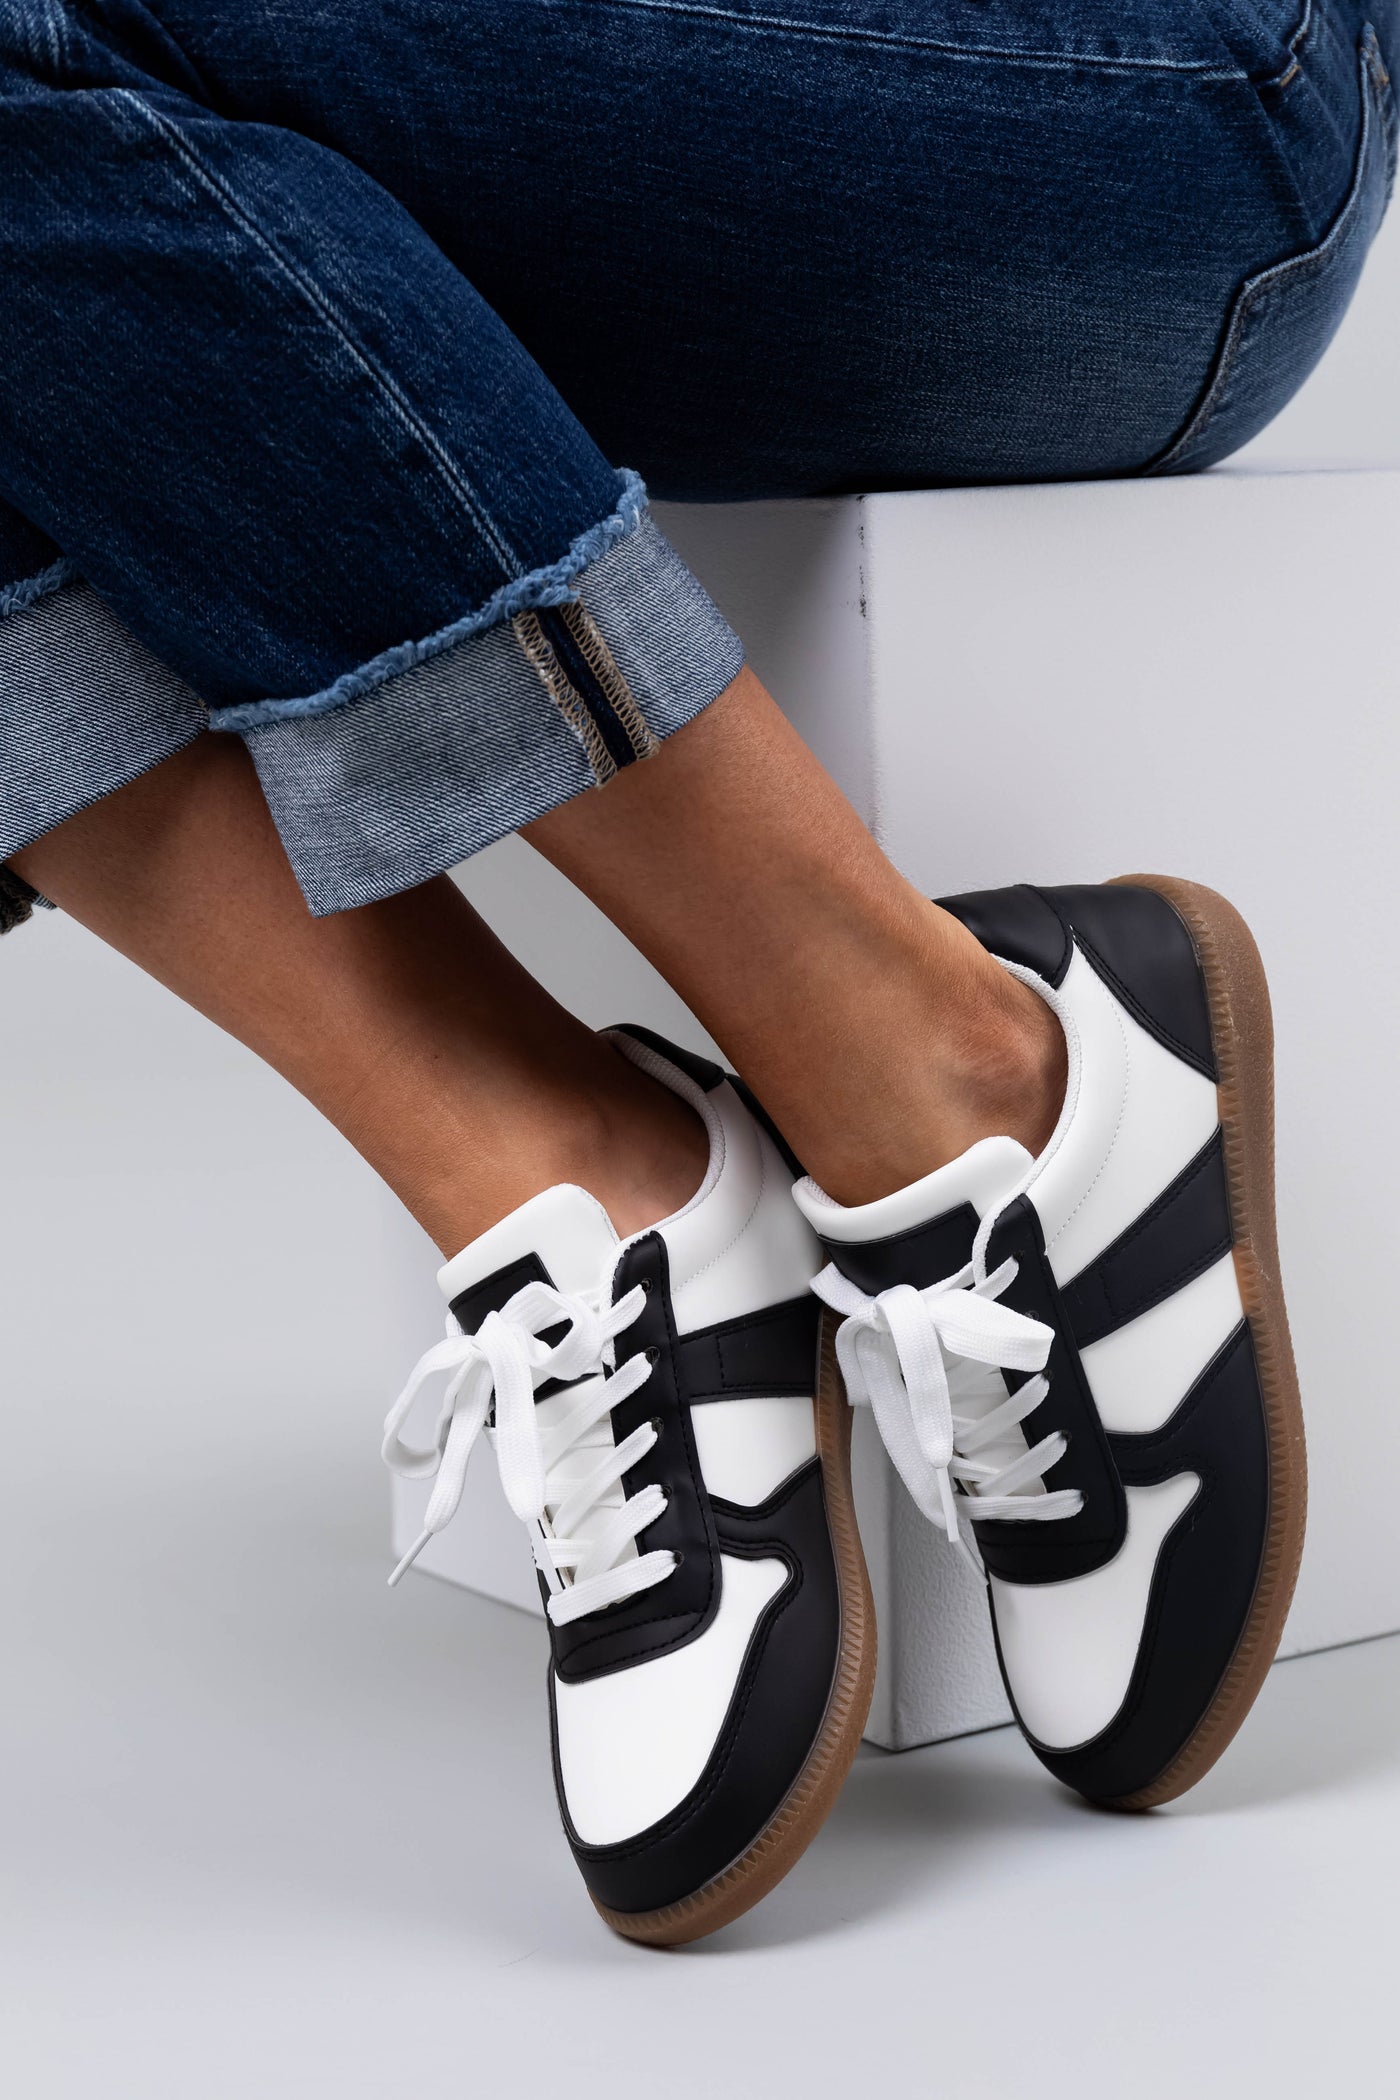 White and Black Colorblock Lace Up Sneakers